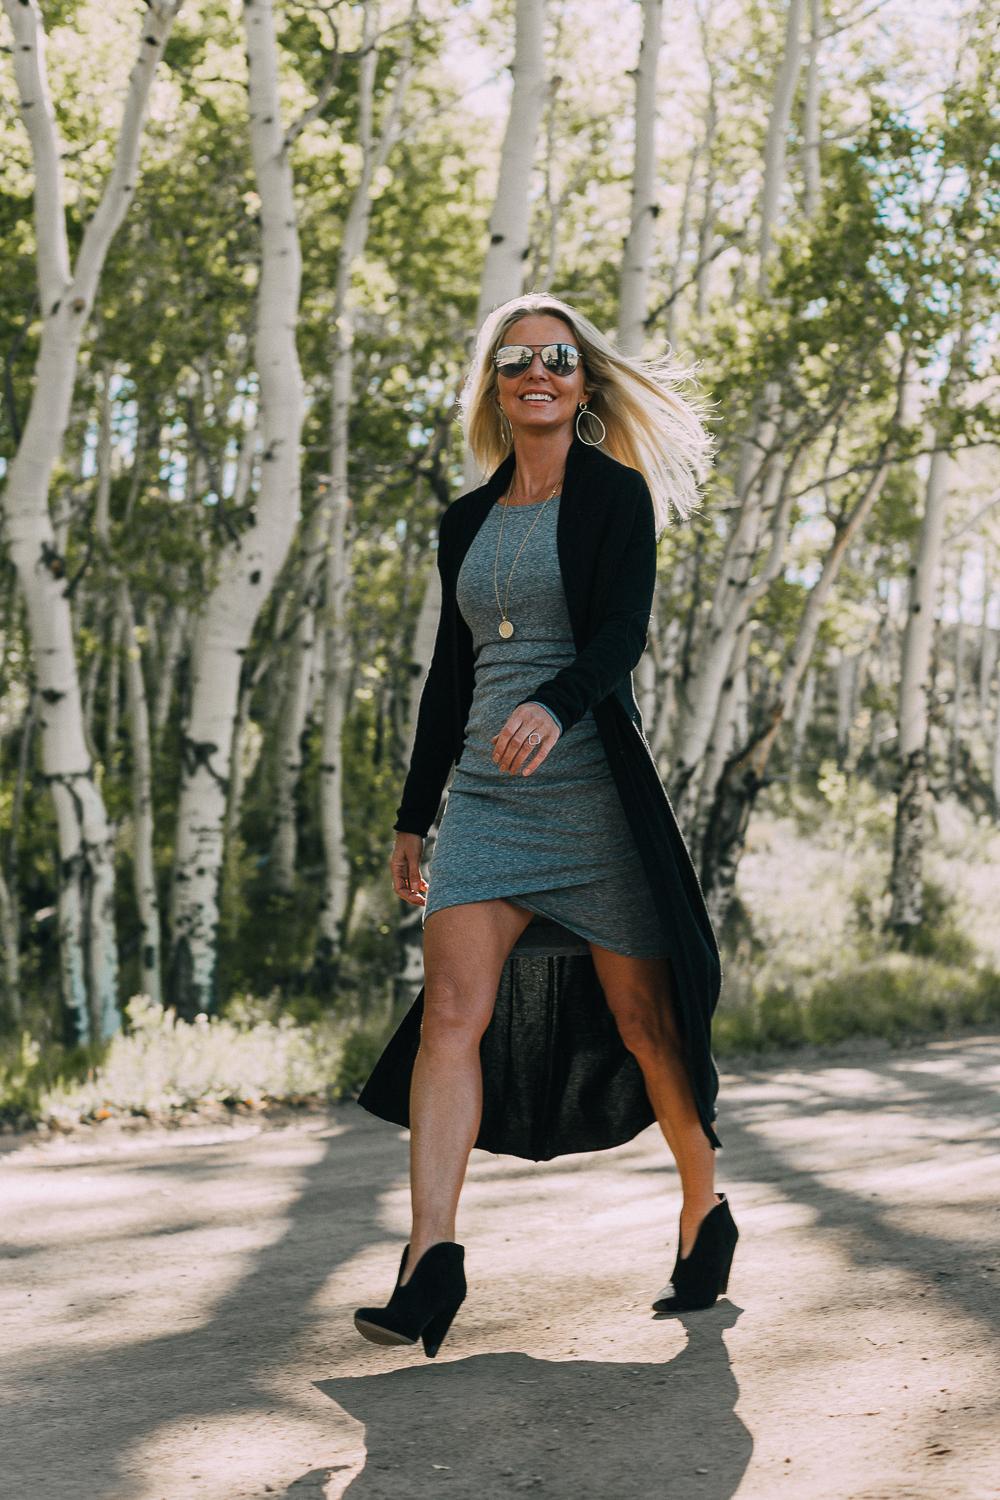 fall booties 2018 featuring black dressy booties by Vince Camuto in black suede paired with a ruched gray t-shirt dress with long sleeves and a long black cardigan sweater on fashion blogger over 40, Erin Busbee of Busbee Style